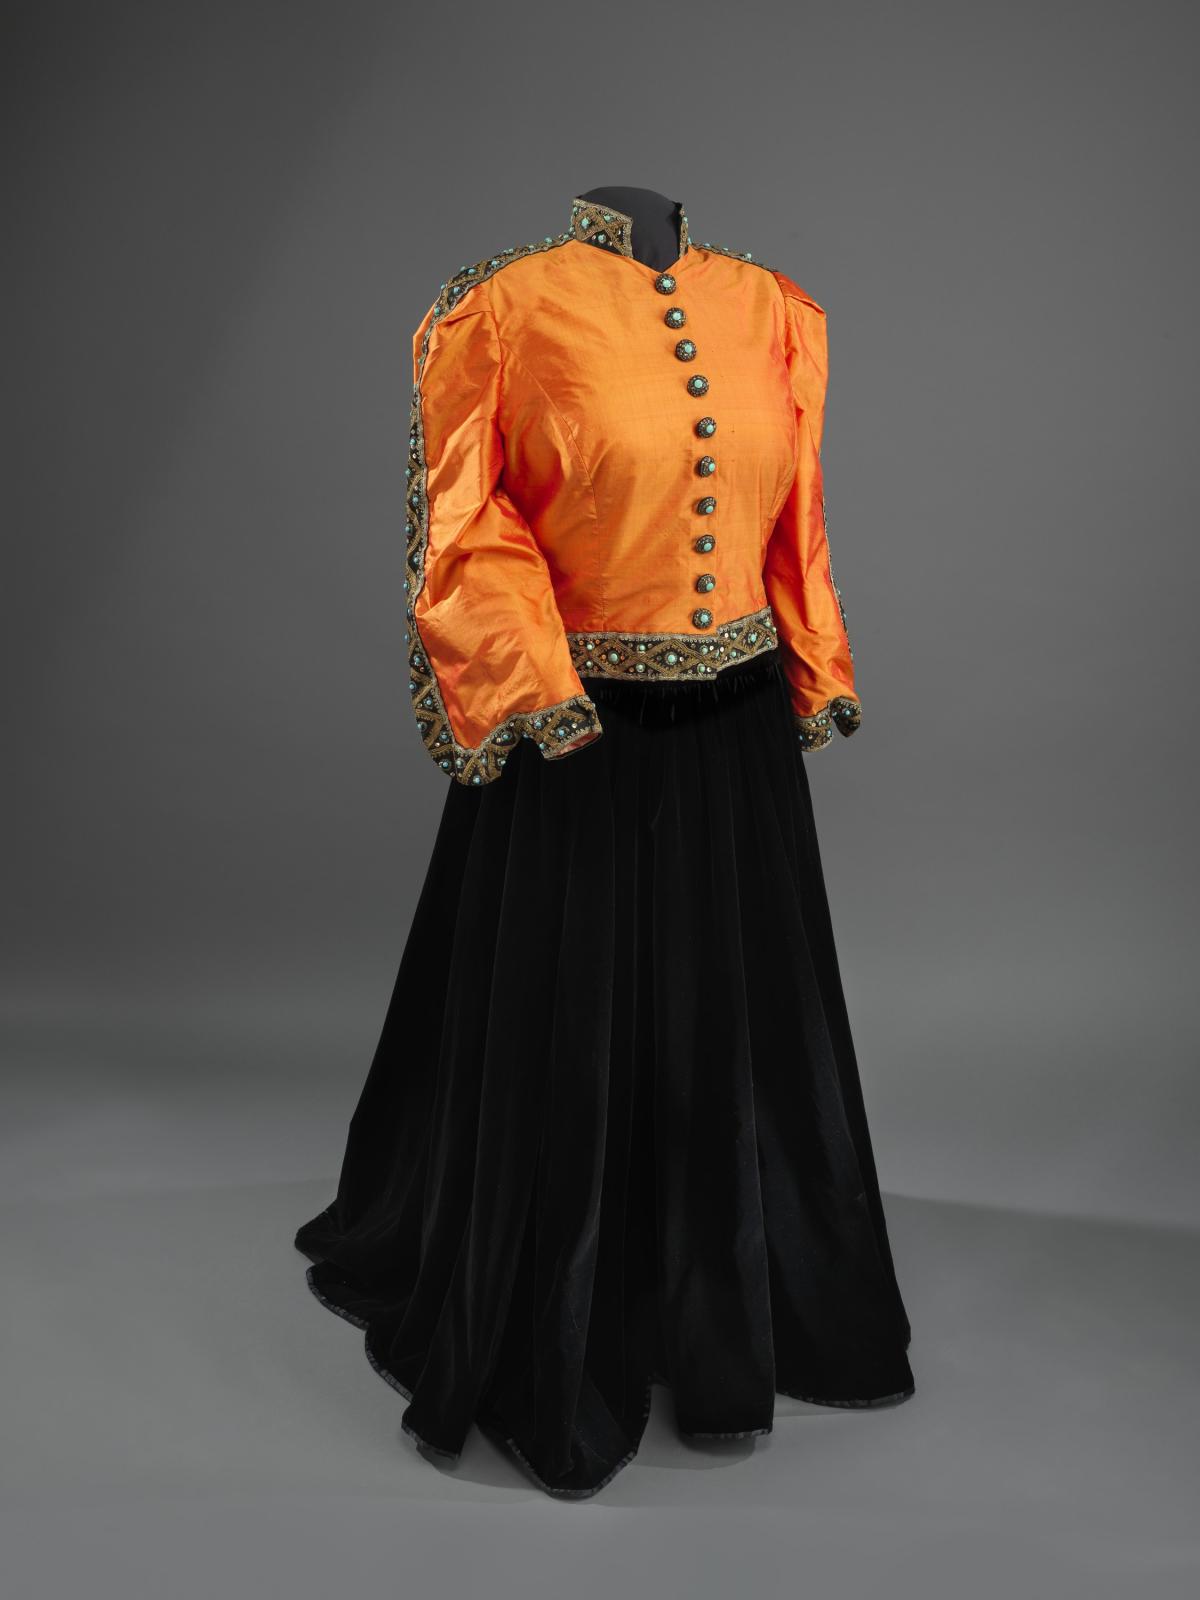 A woman's dress that is orange on top with black buttons and a black skirt.